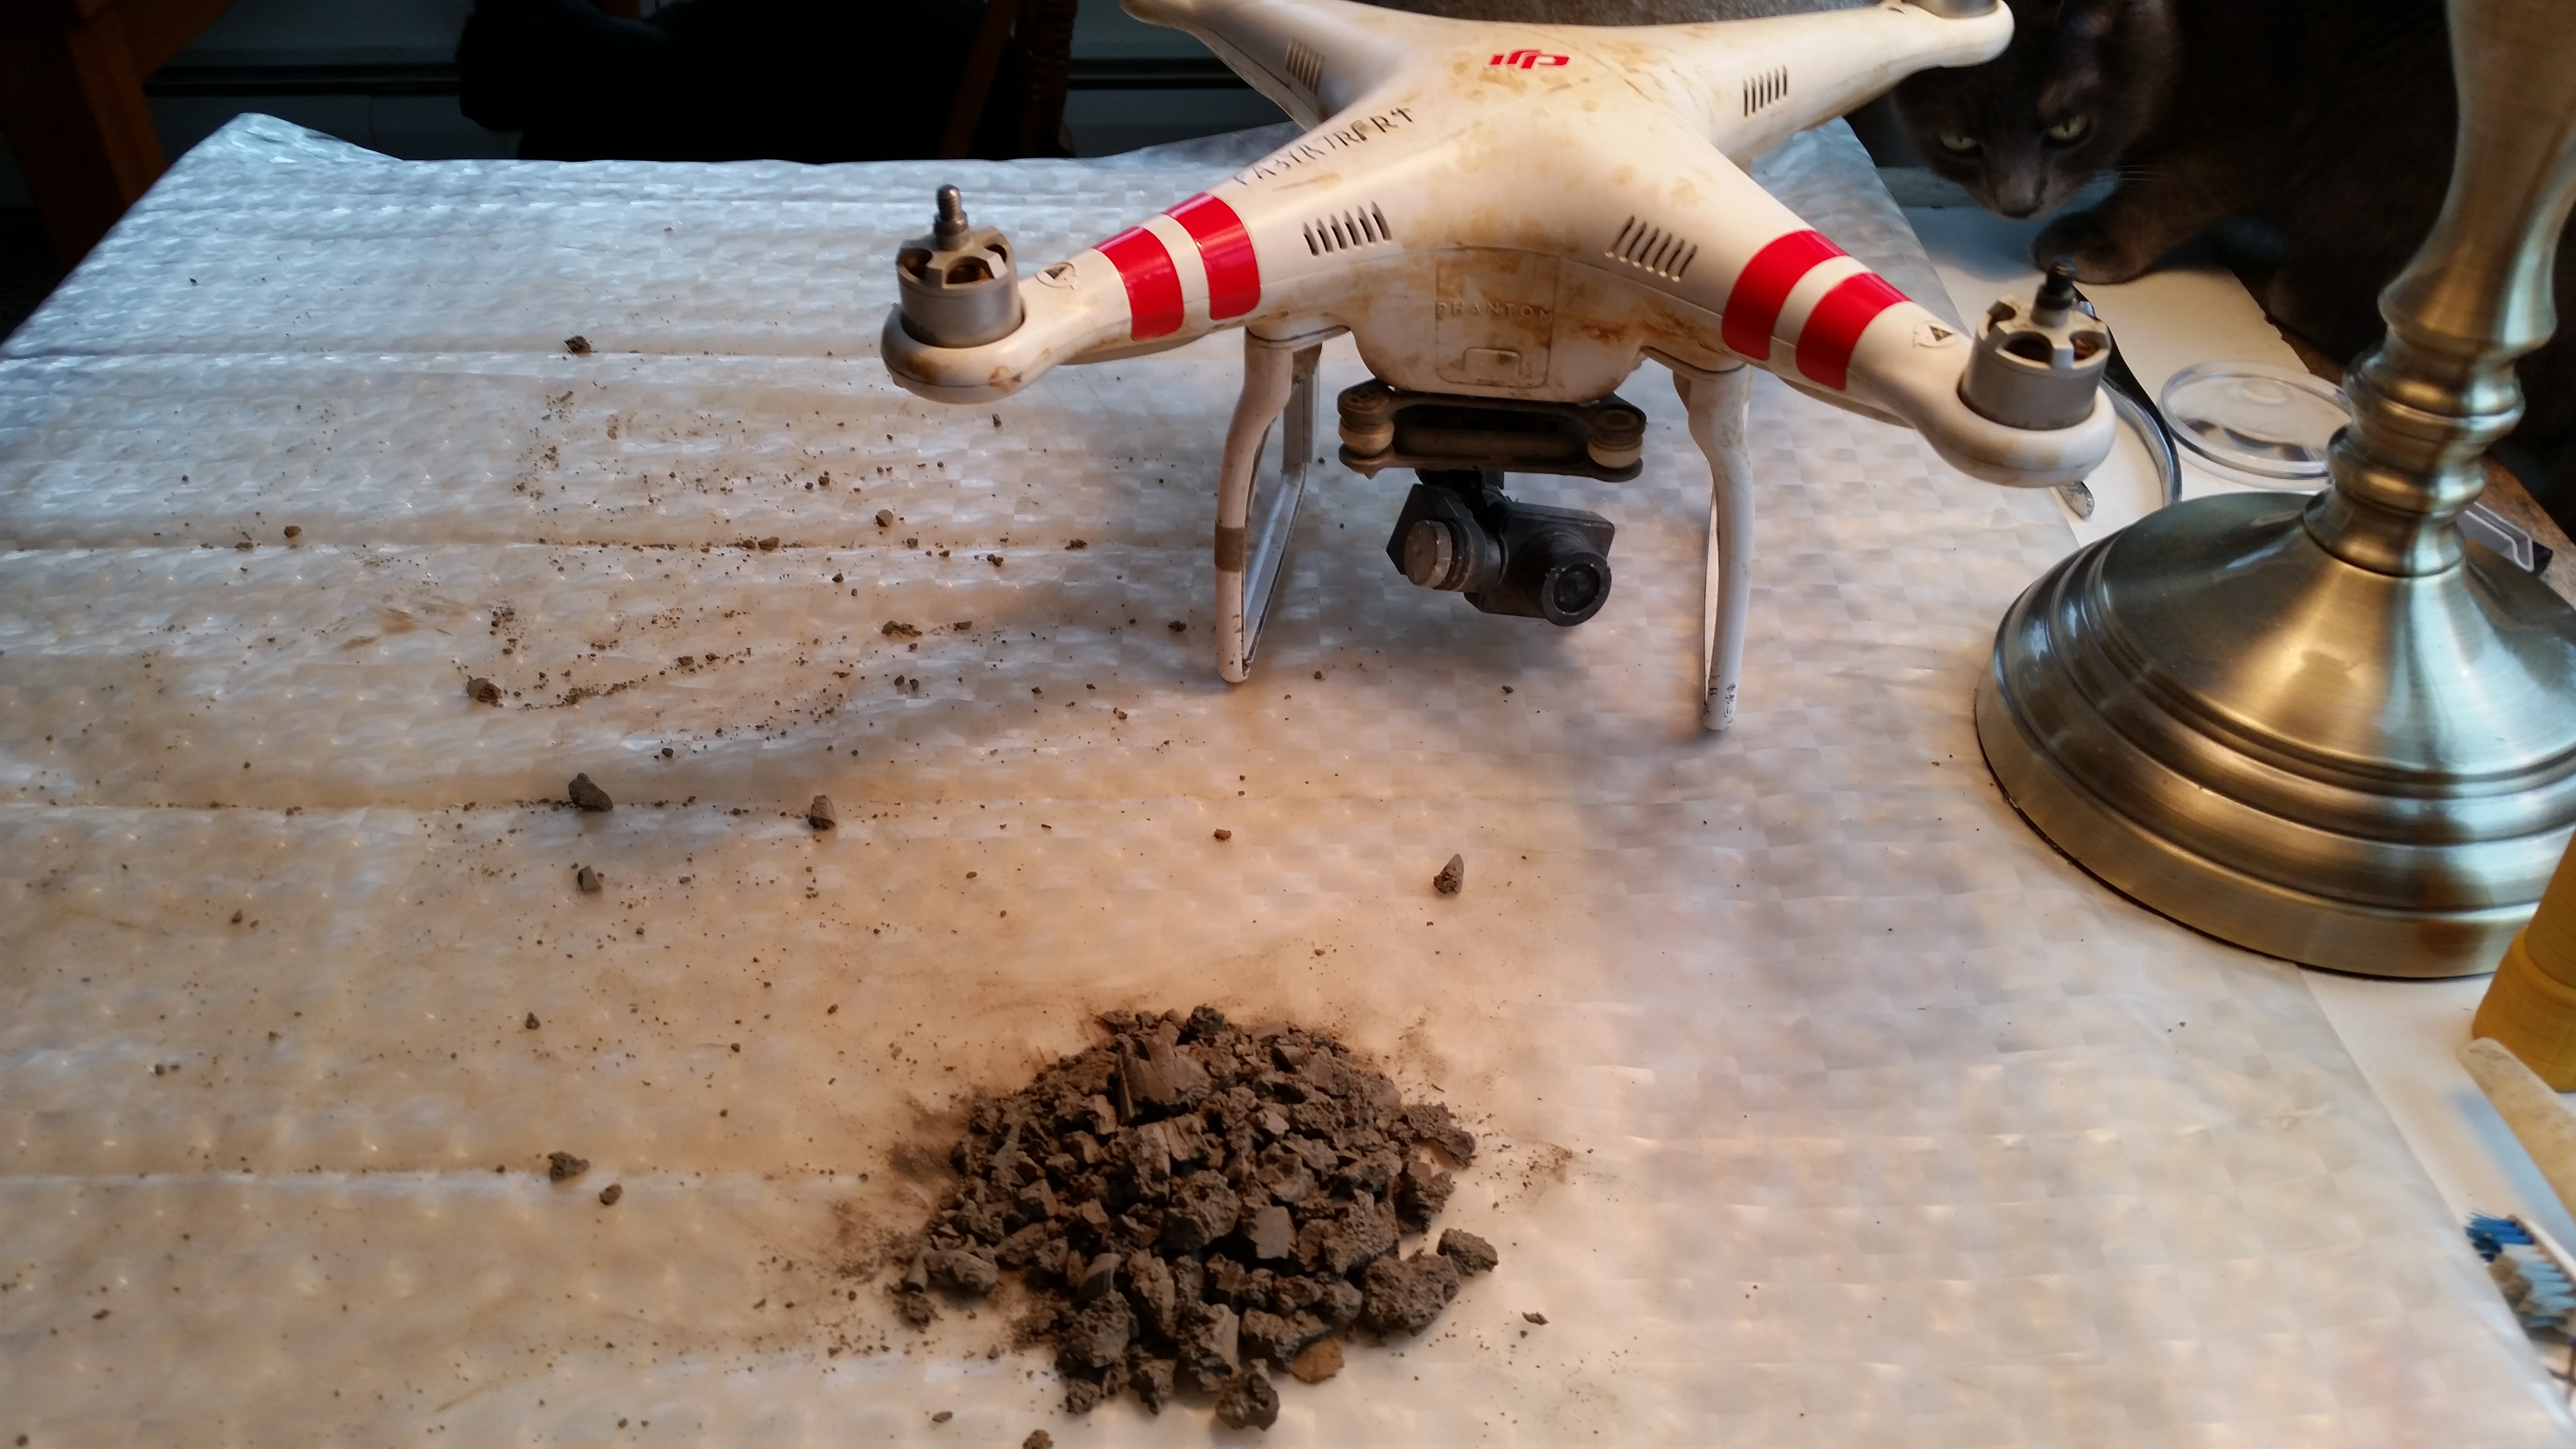 drone cleaning.jpg